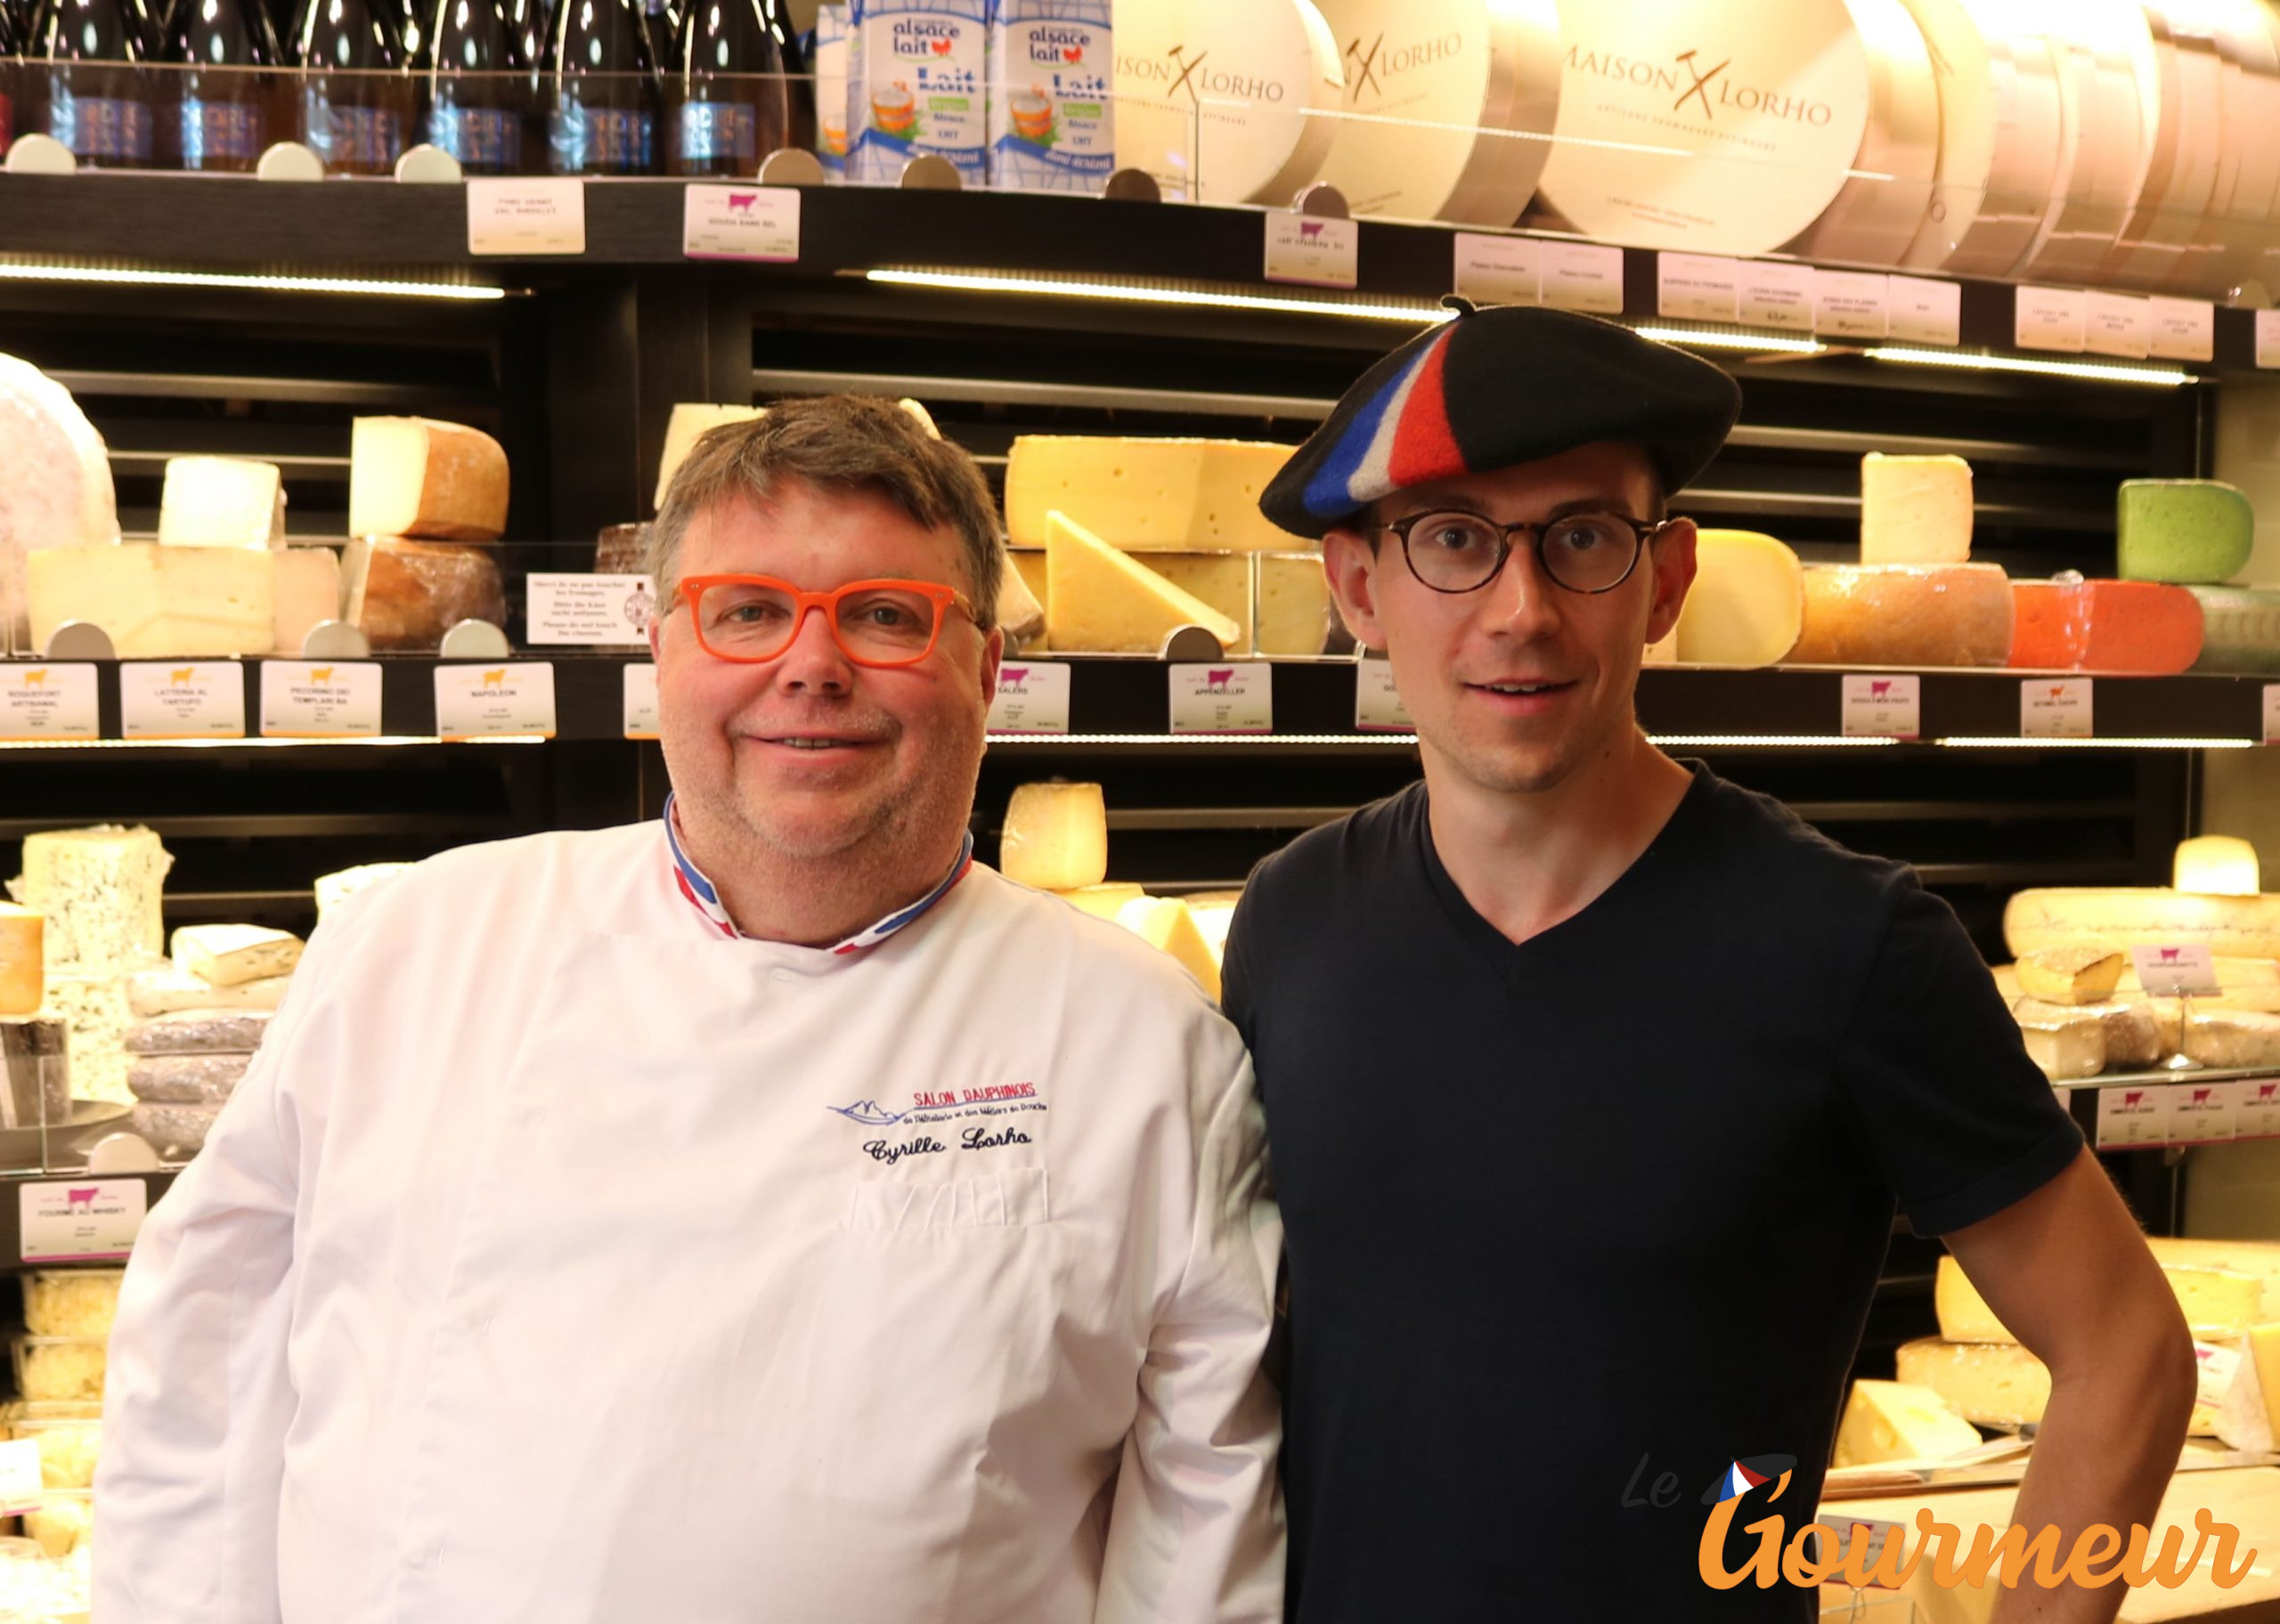 fromagerie lorho - strasbourg-min